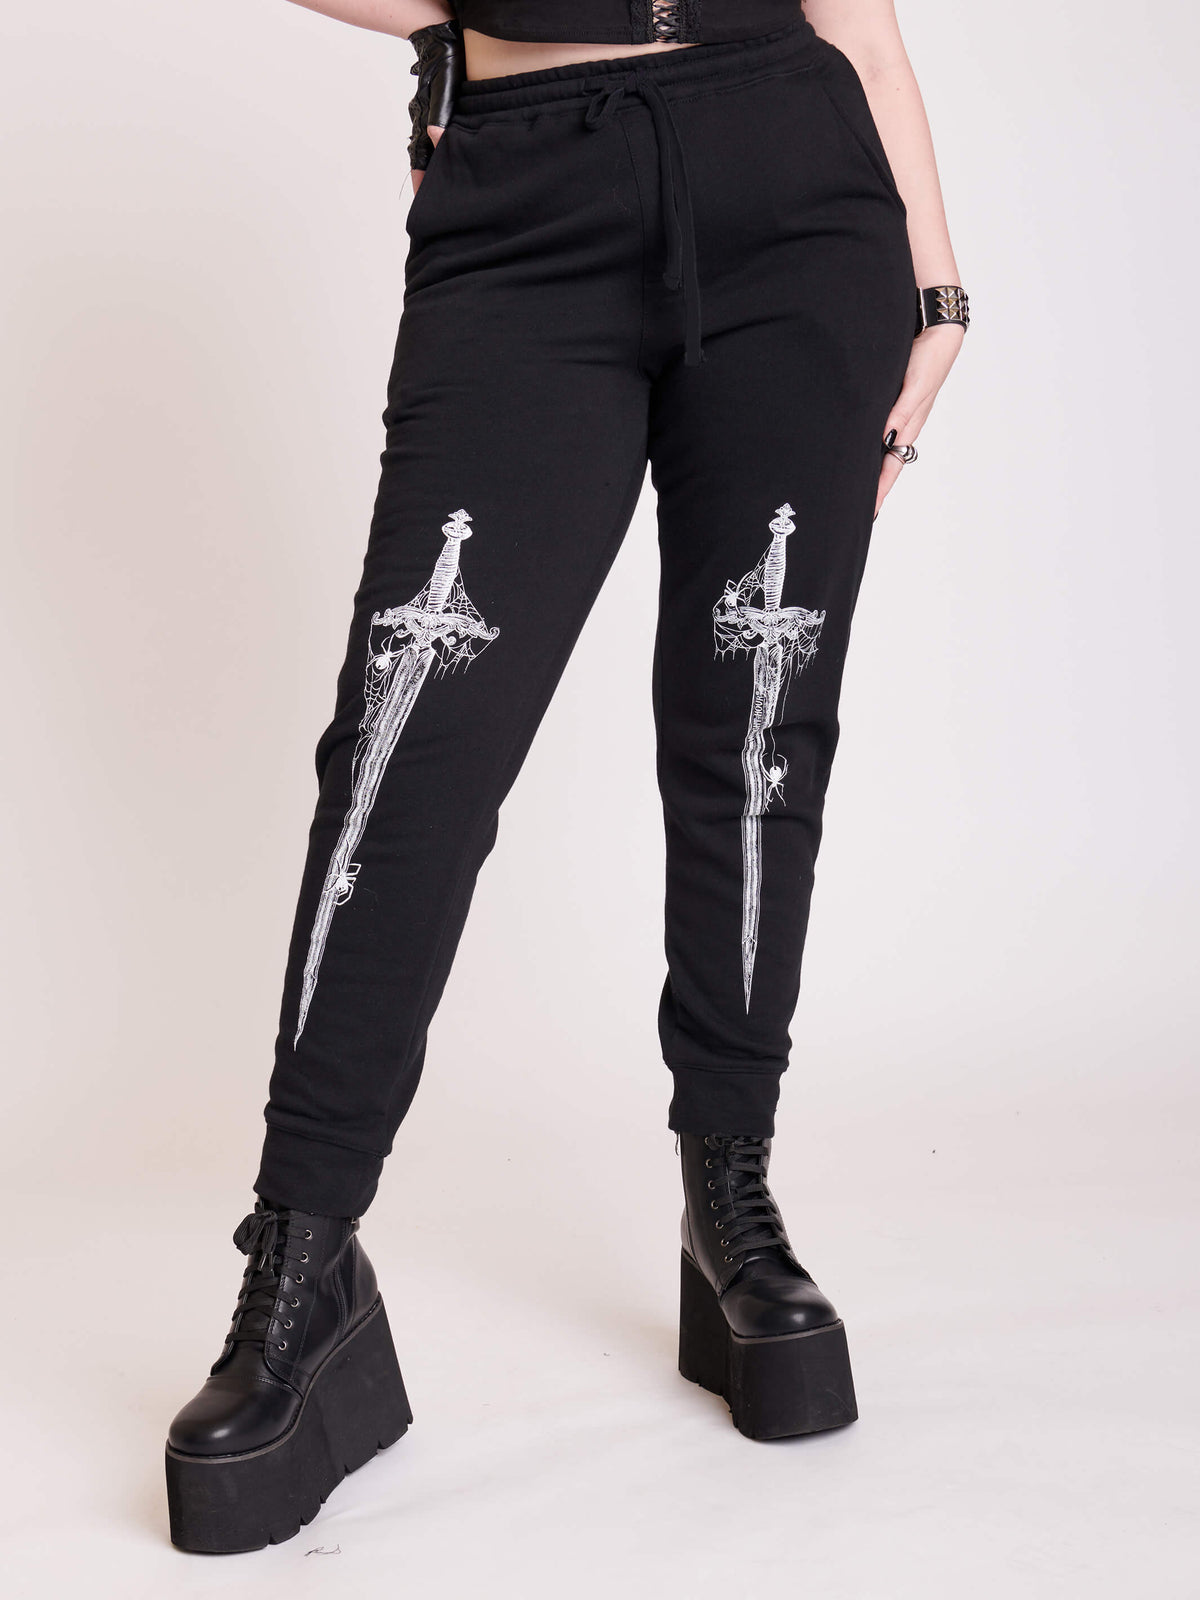 black joggers with dagger graphic